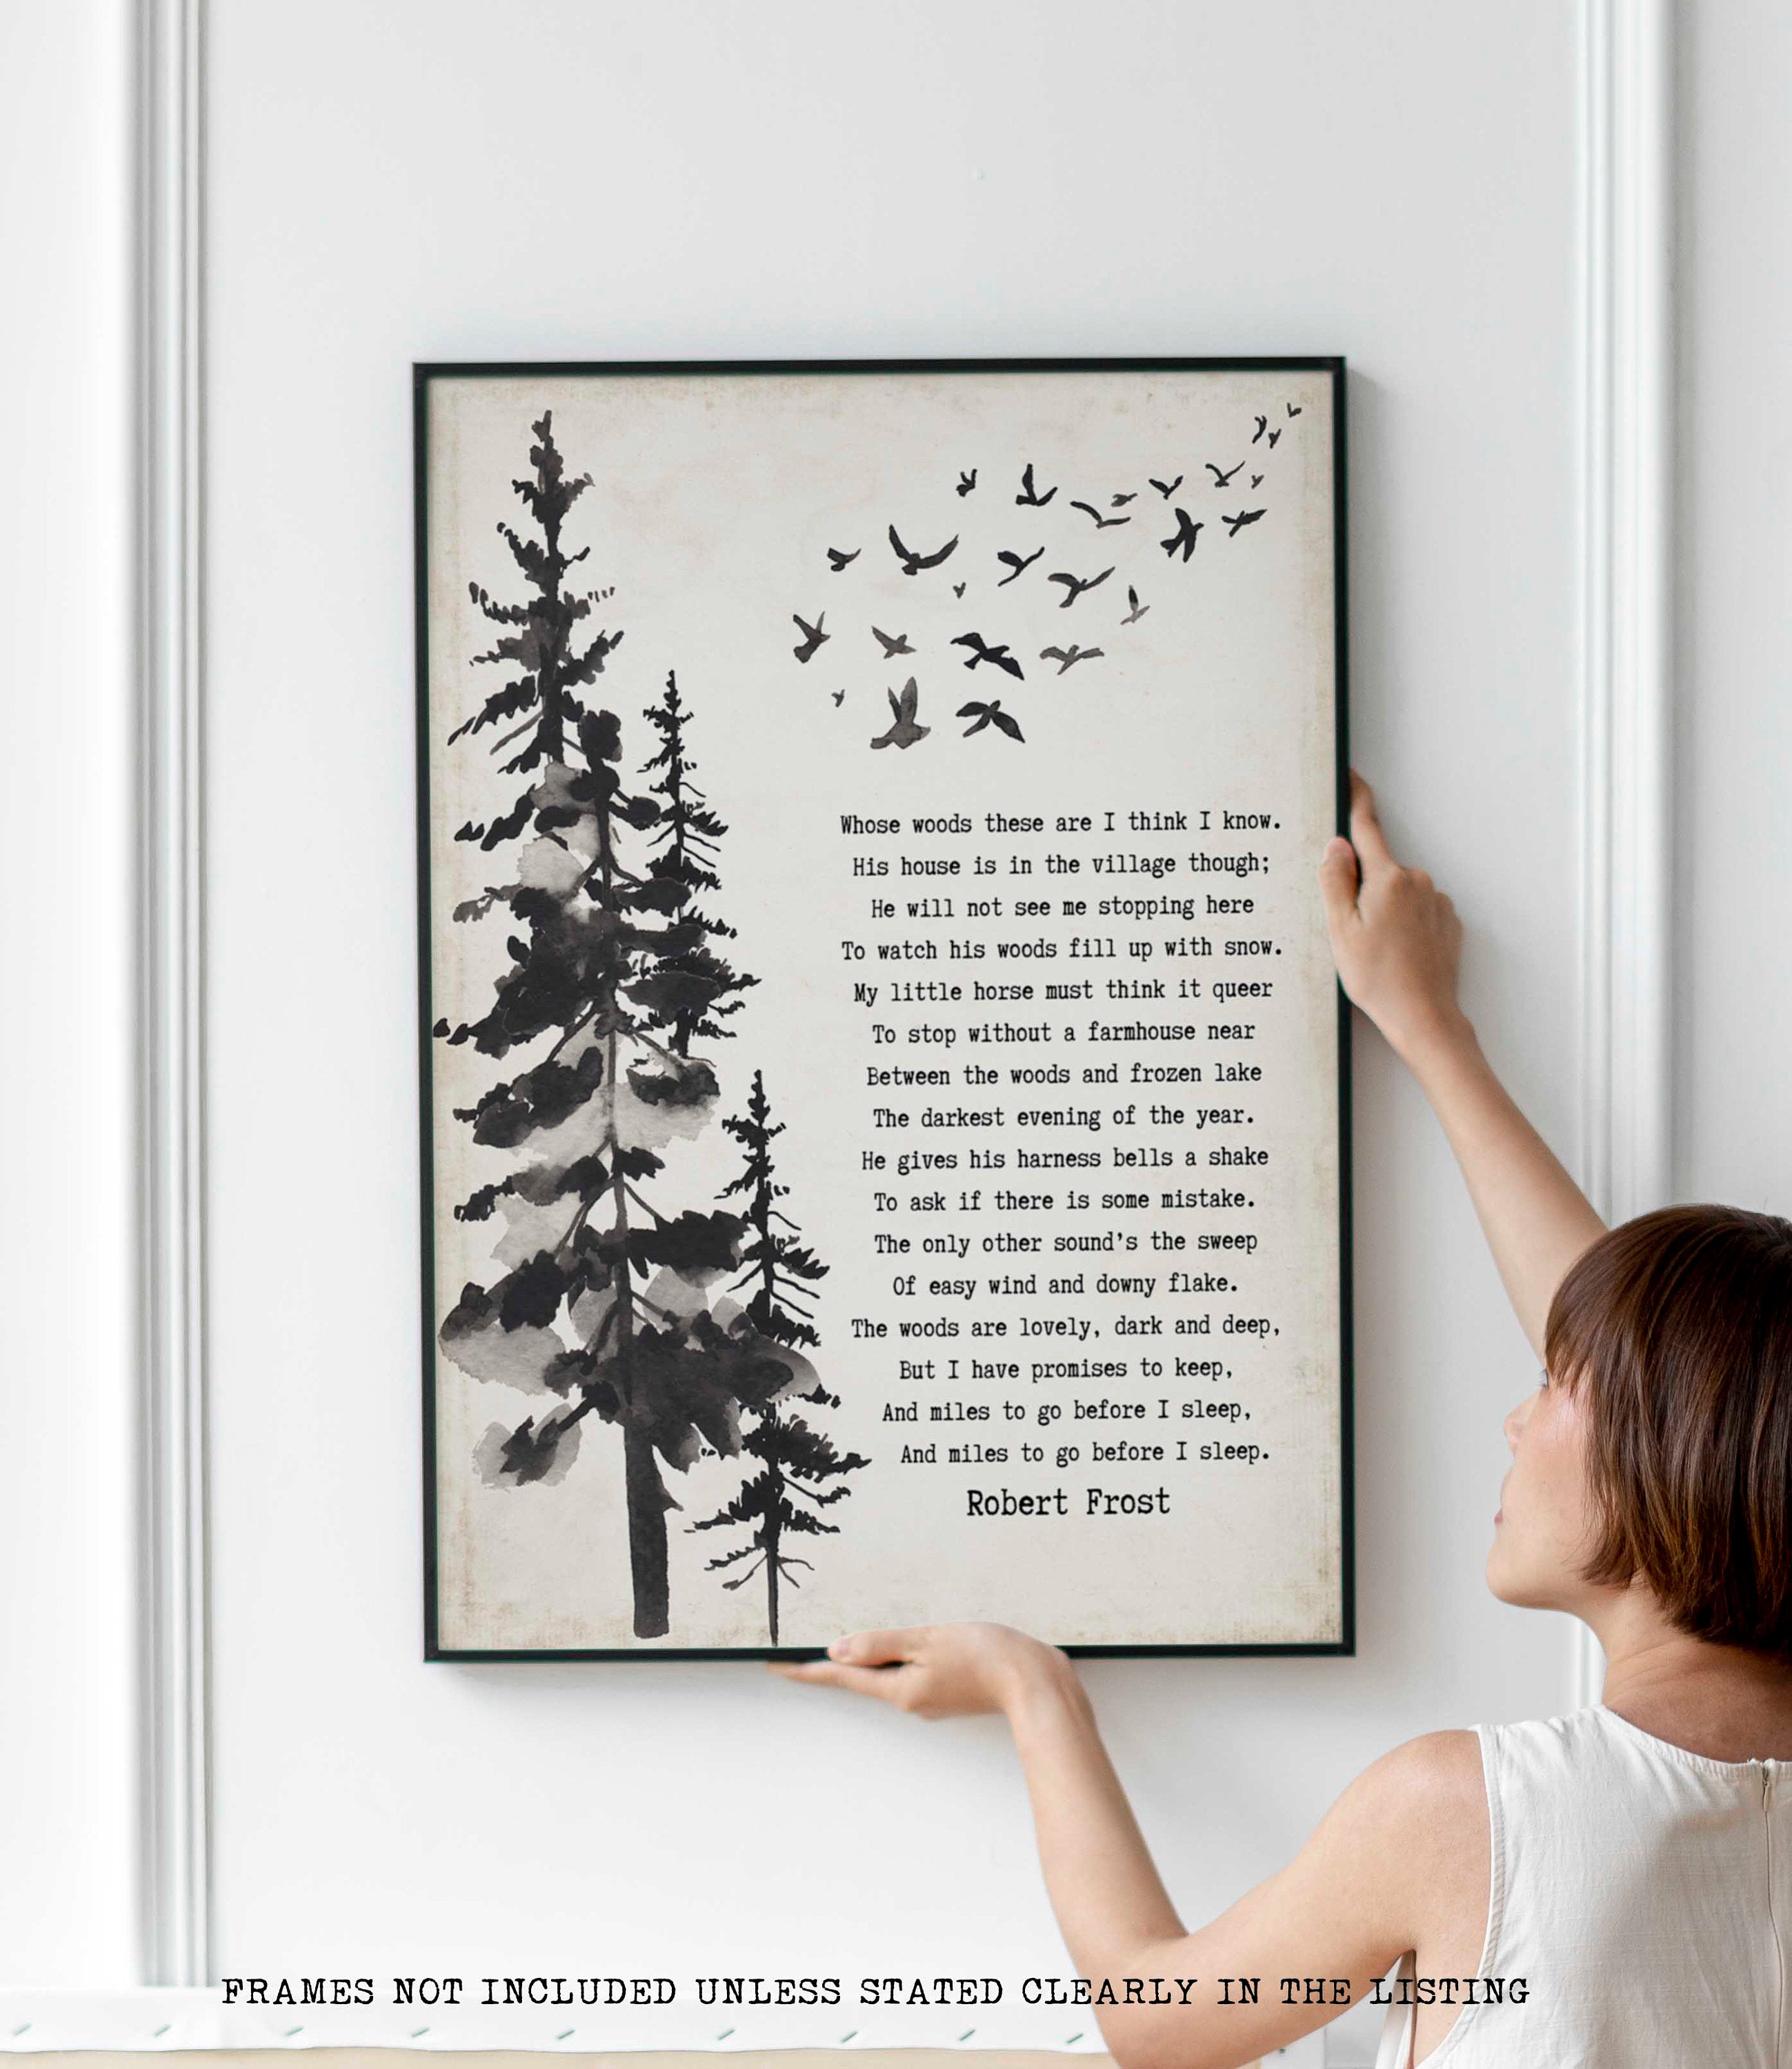 Framed Art Robert Frost Stopping by the Woods on a Snowy Evening Wall Art Print in Black & White for Home Wall Decor